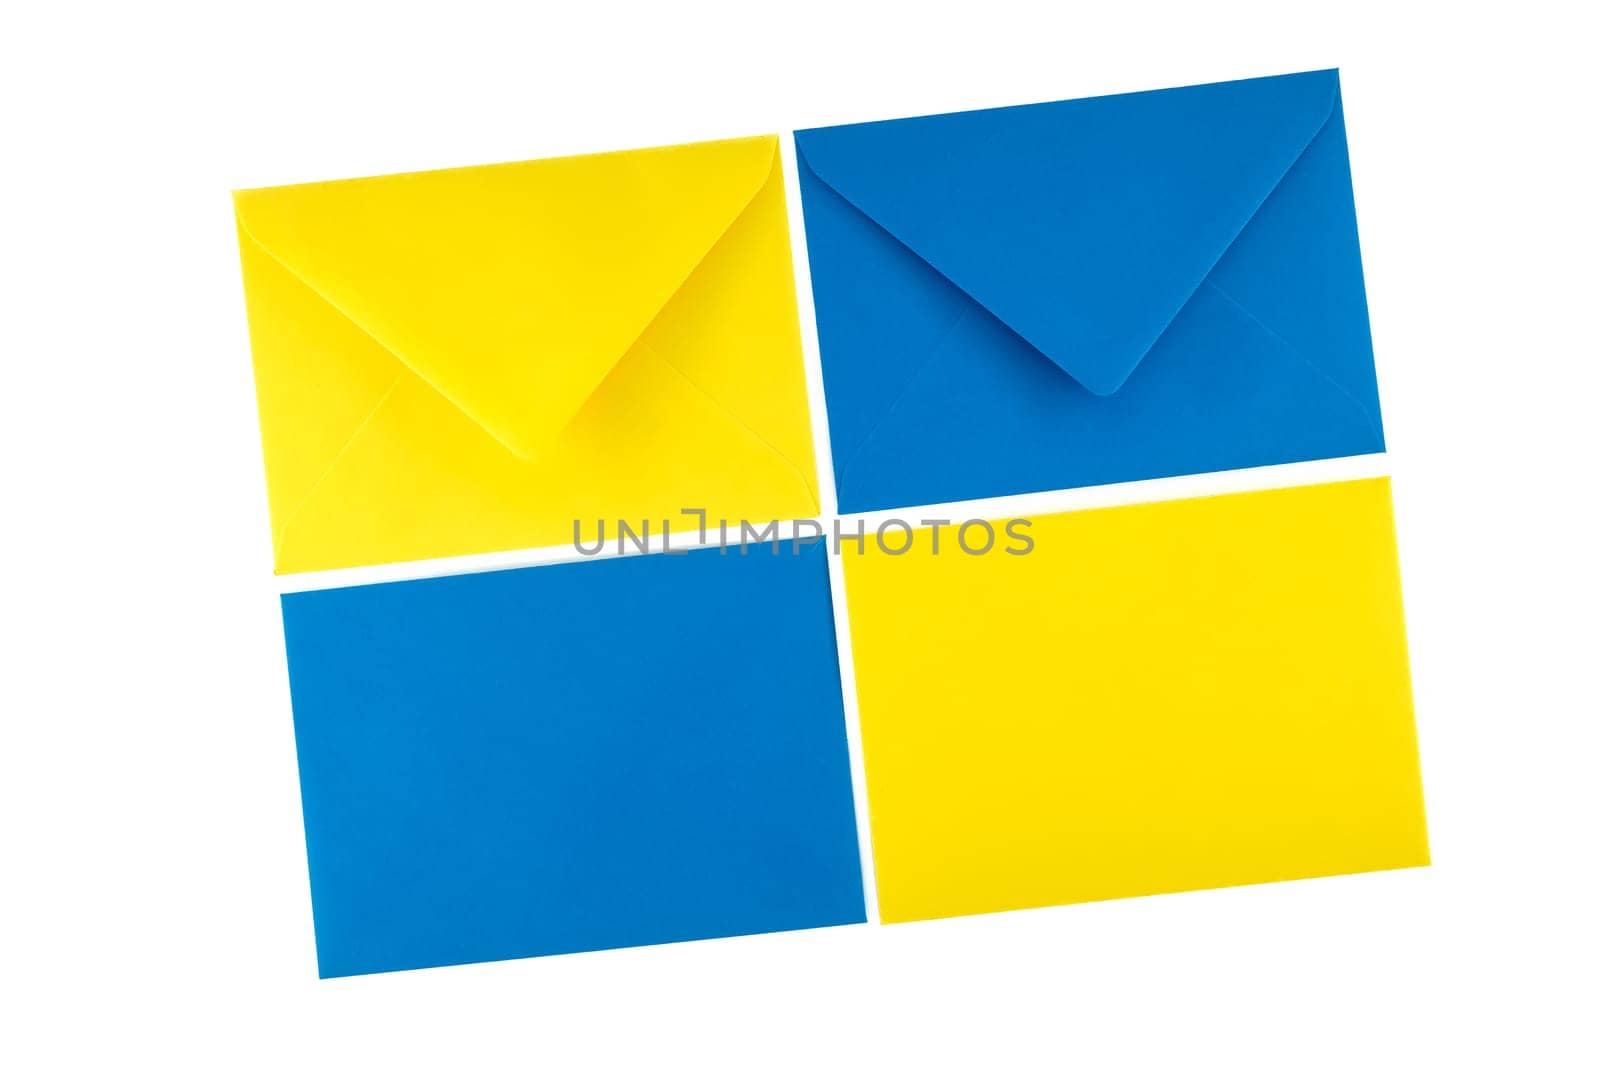 Four blue and yellow paper envelope arranged in a square formation follow the scheme of the Windows 10 logo